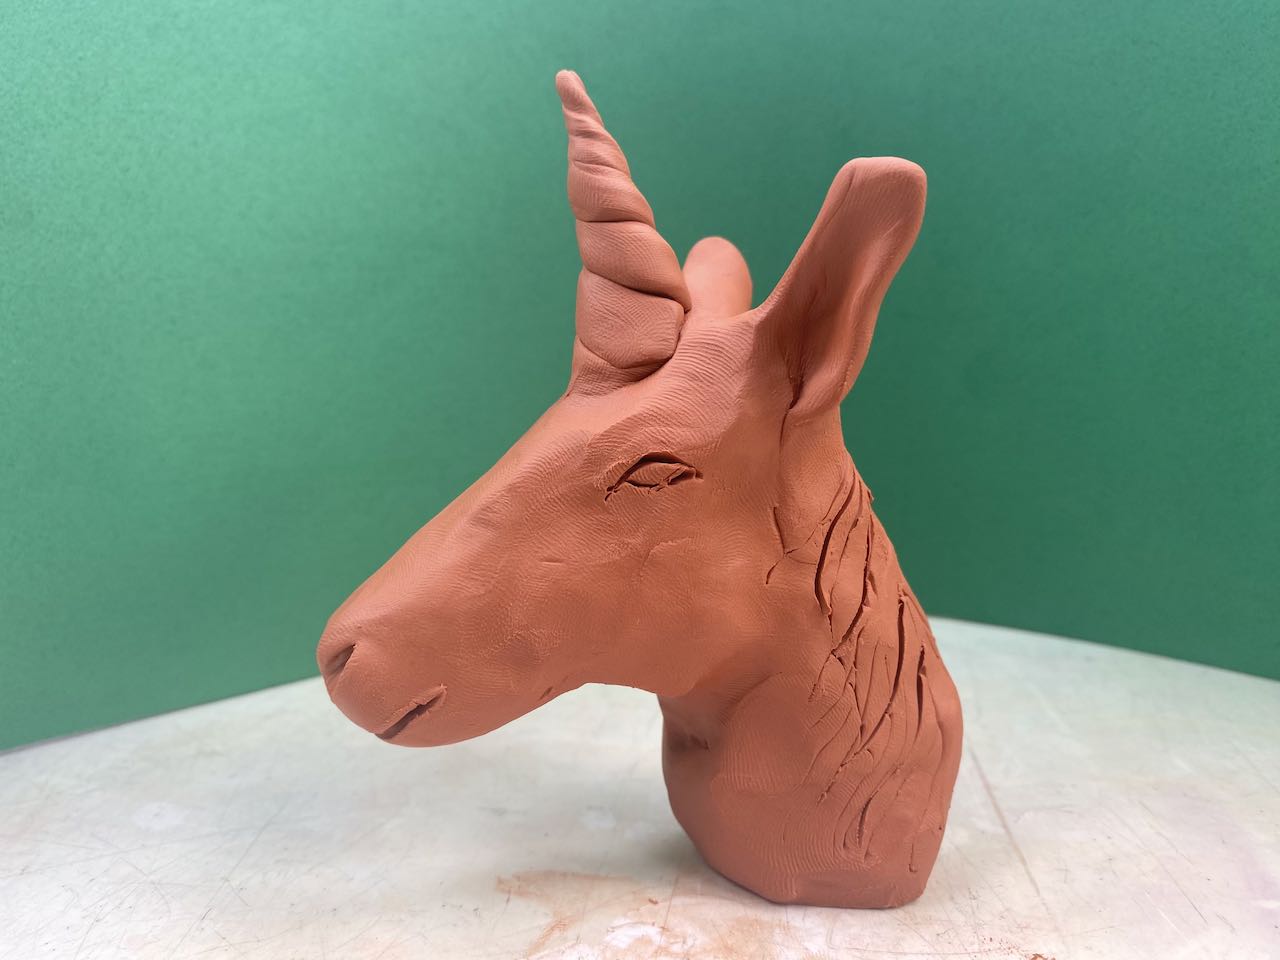 Waldorf clay modeling for first grade or beginners